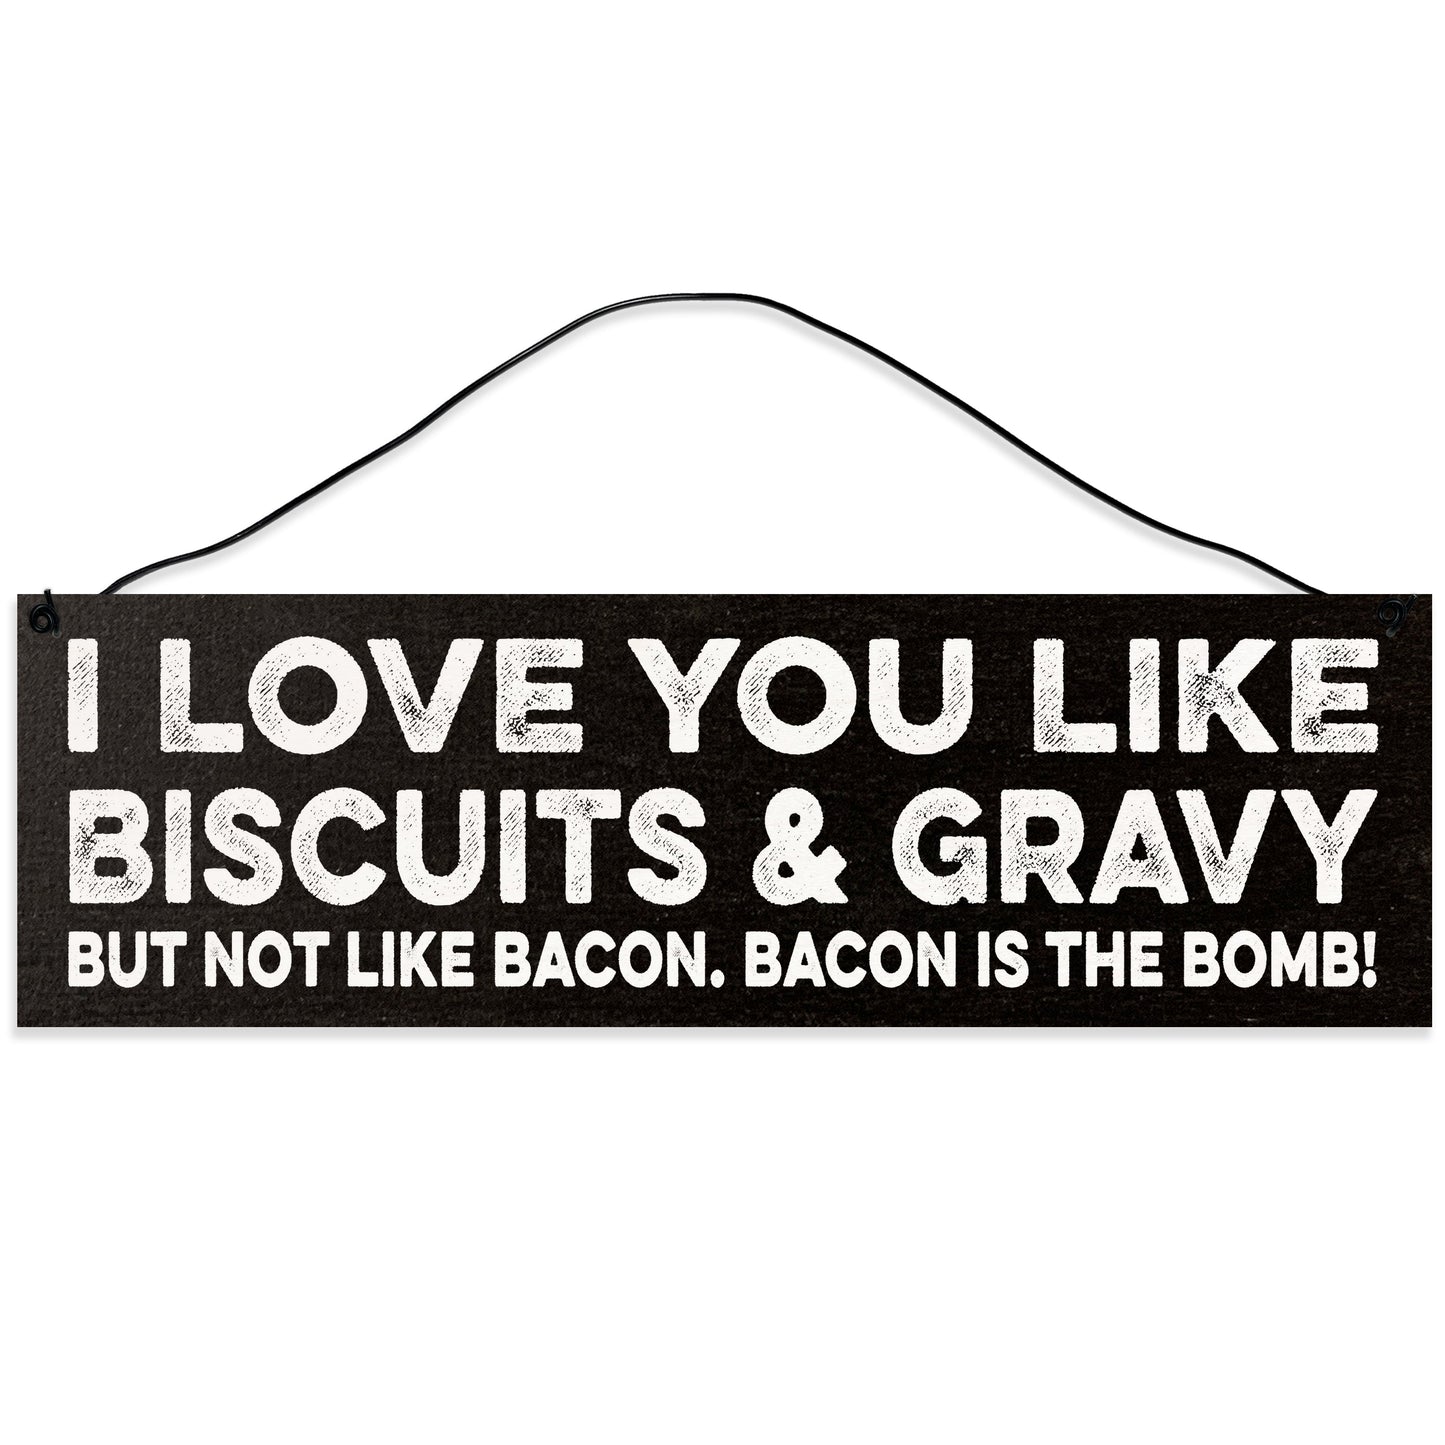 Sawyer's Mill - I Love You Like Biscuits and Gravy but Not Like Bacon. Wood Sign for Home or Office. Measures 3x10 inches.